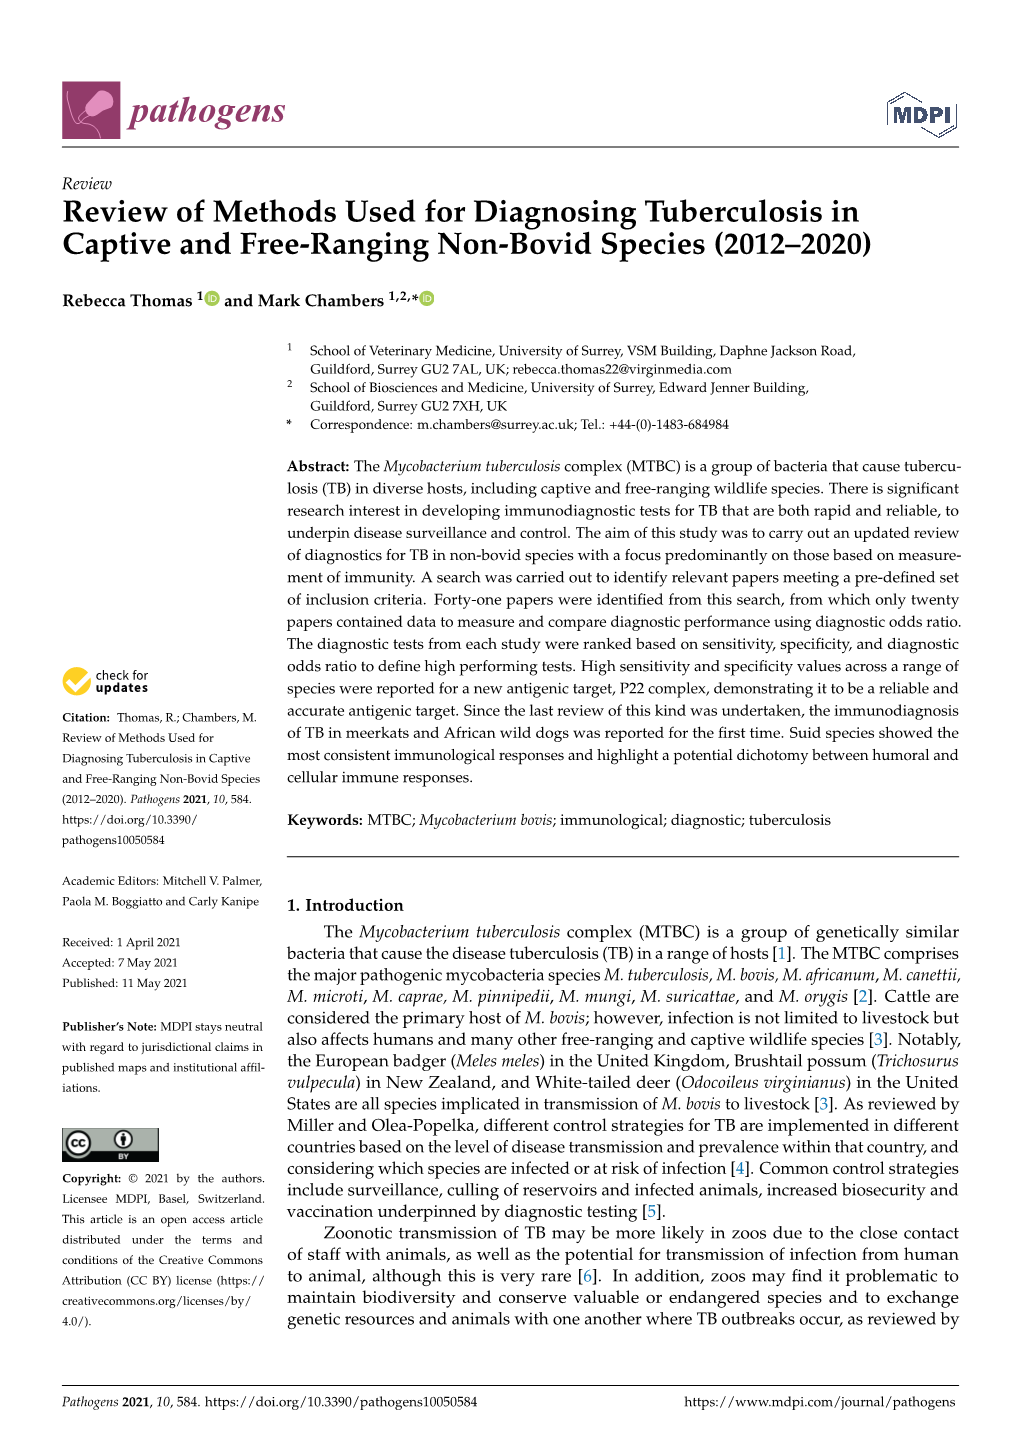 Review of Methods Used for Diagnosing Tuberculosis in Captive and Free-Ranging Non-Bovid Species (2012–2020)